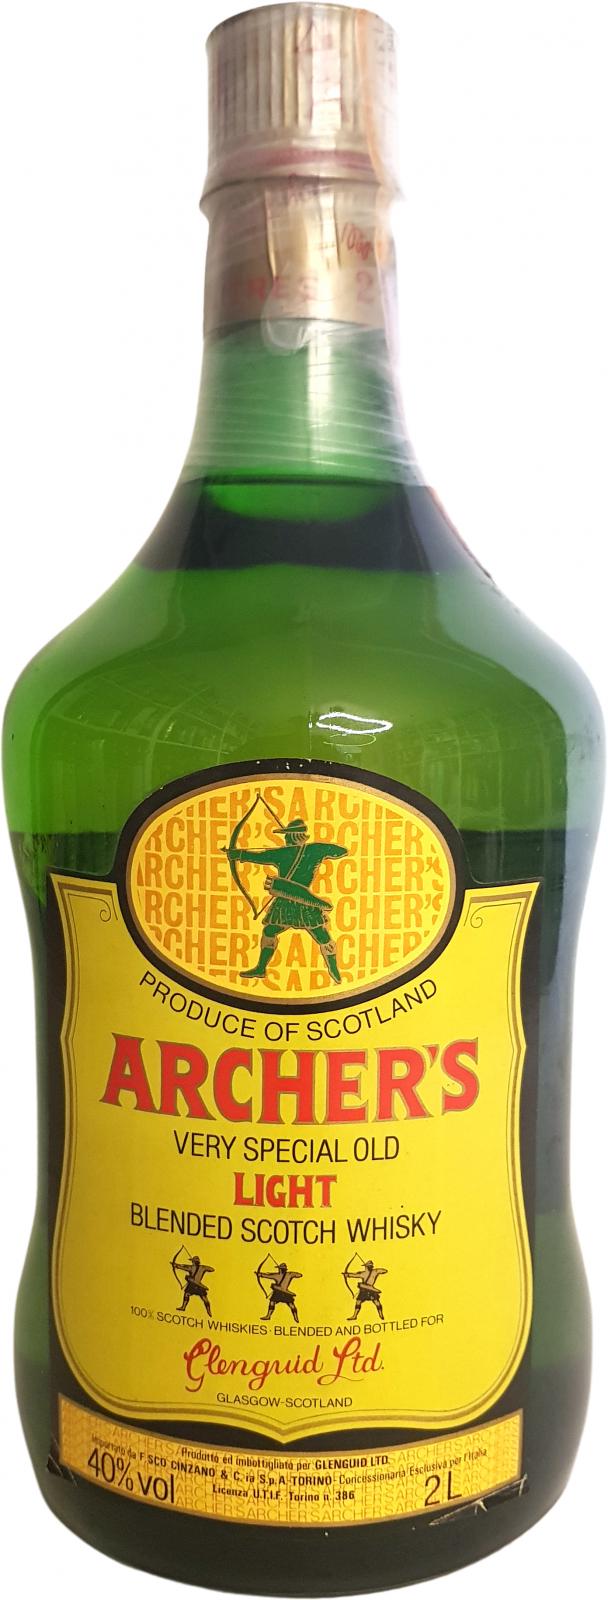 Archer's Very Special Old Light Blended Scotch Whisky 40% 2000ml